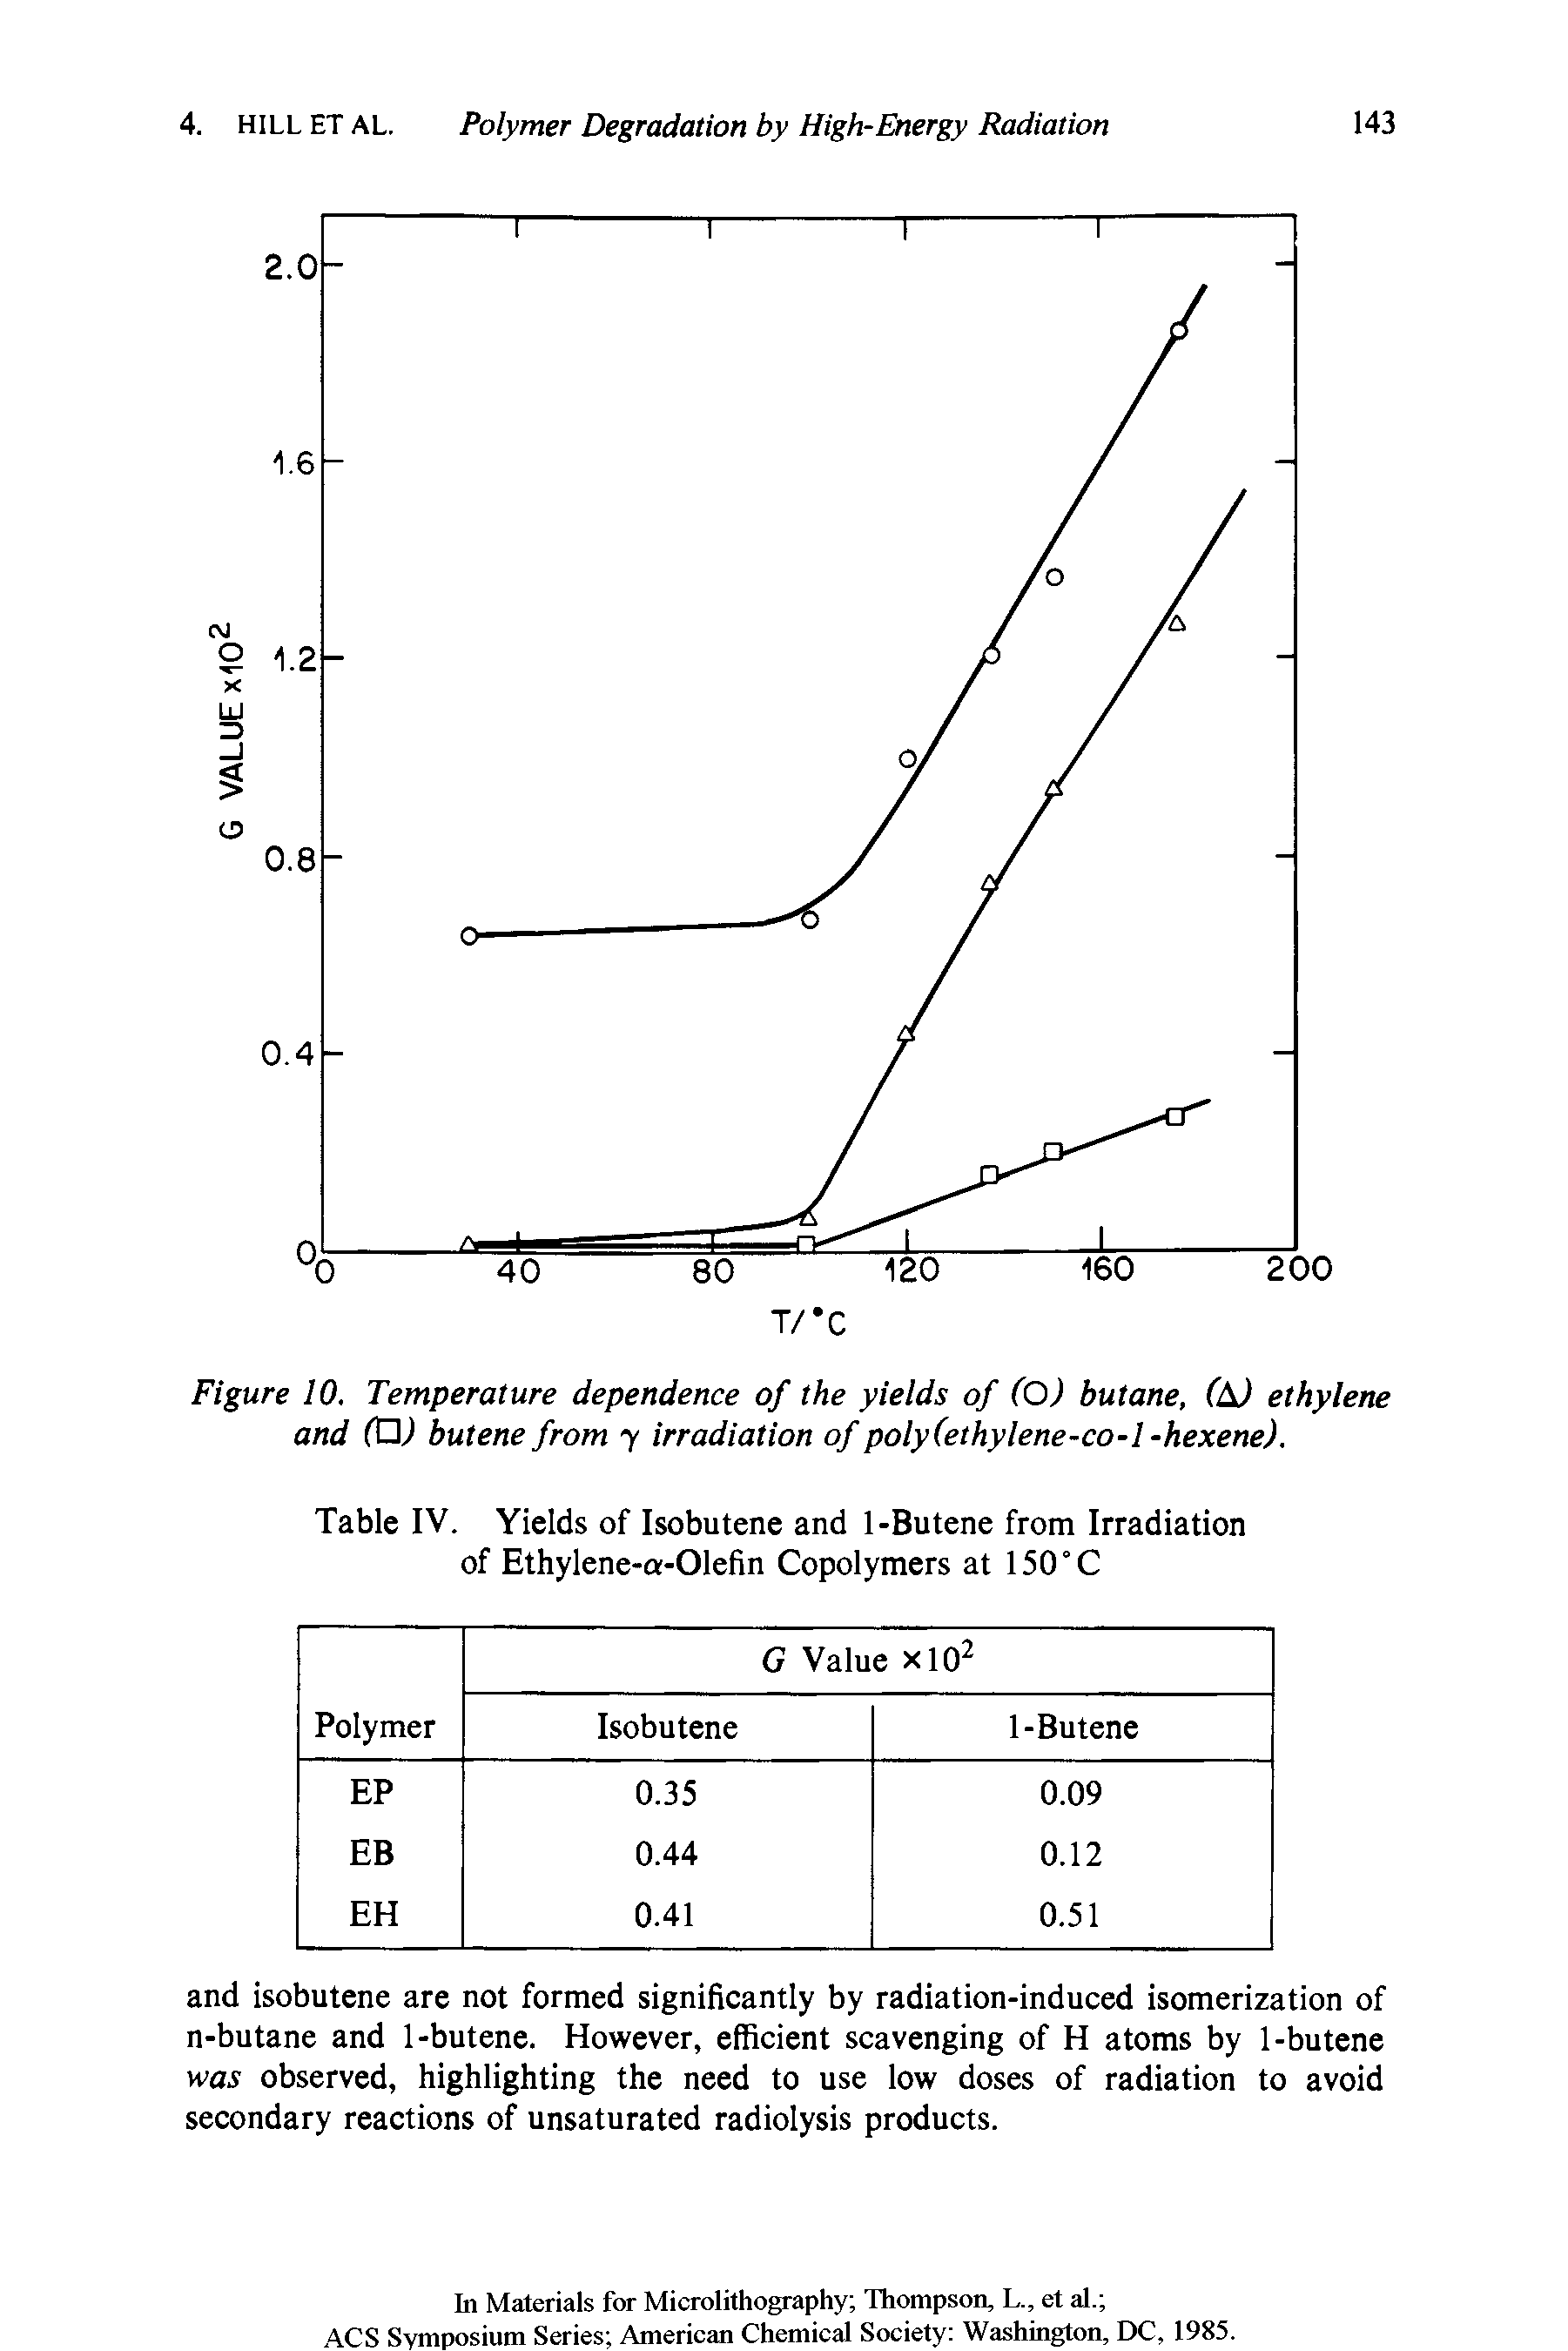 Figure 10. Temperature dependence of the yields of (O) butane, (A) ethylene and (HU butene from irradiation of poly(ethylene-co-l -hexene).